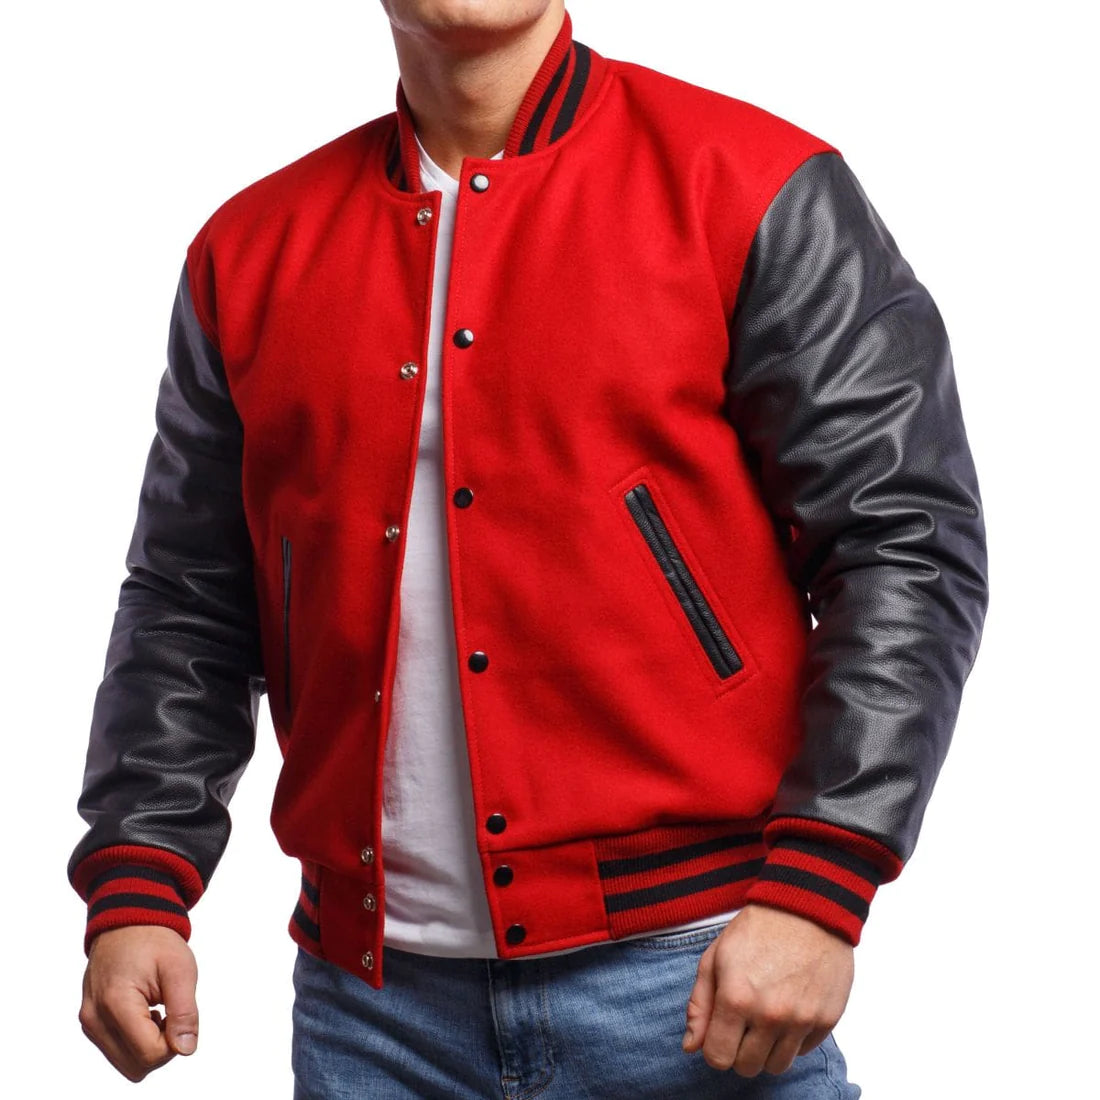 Mens-Red-And-Black-Leather-Varsity-Jacket